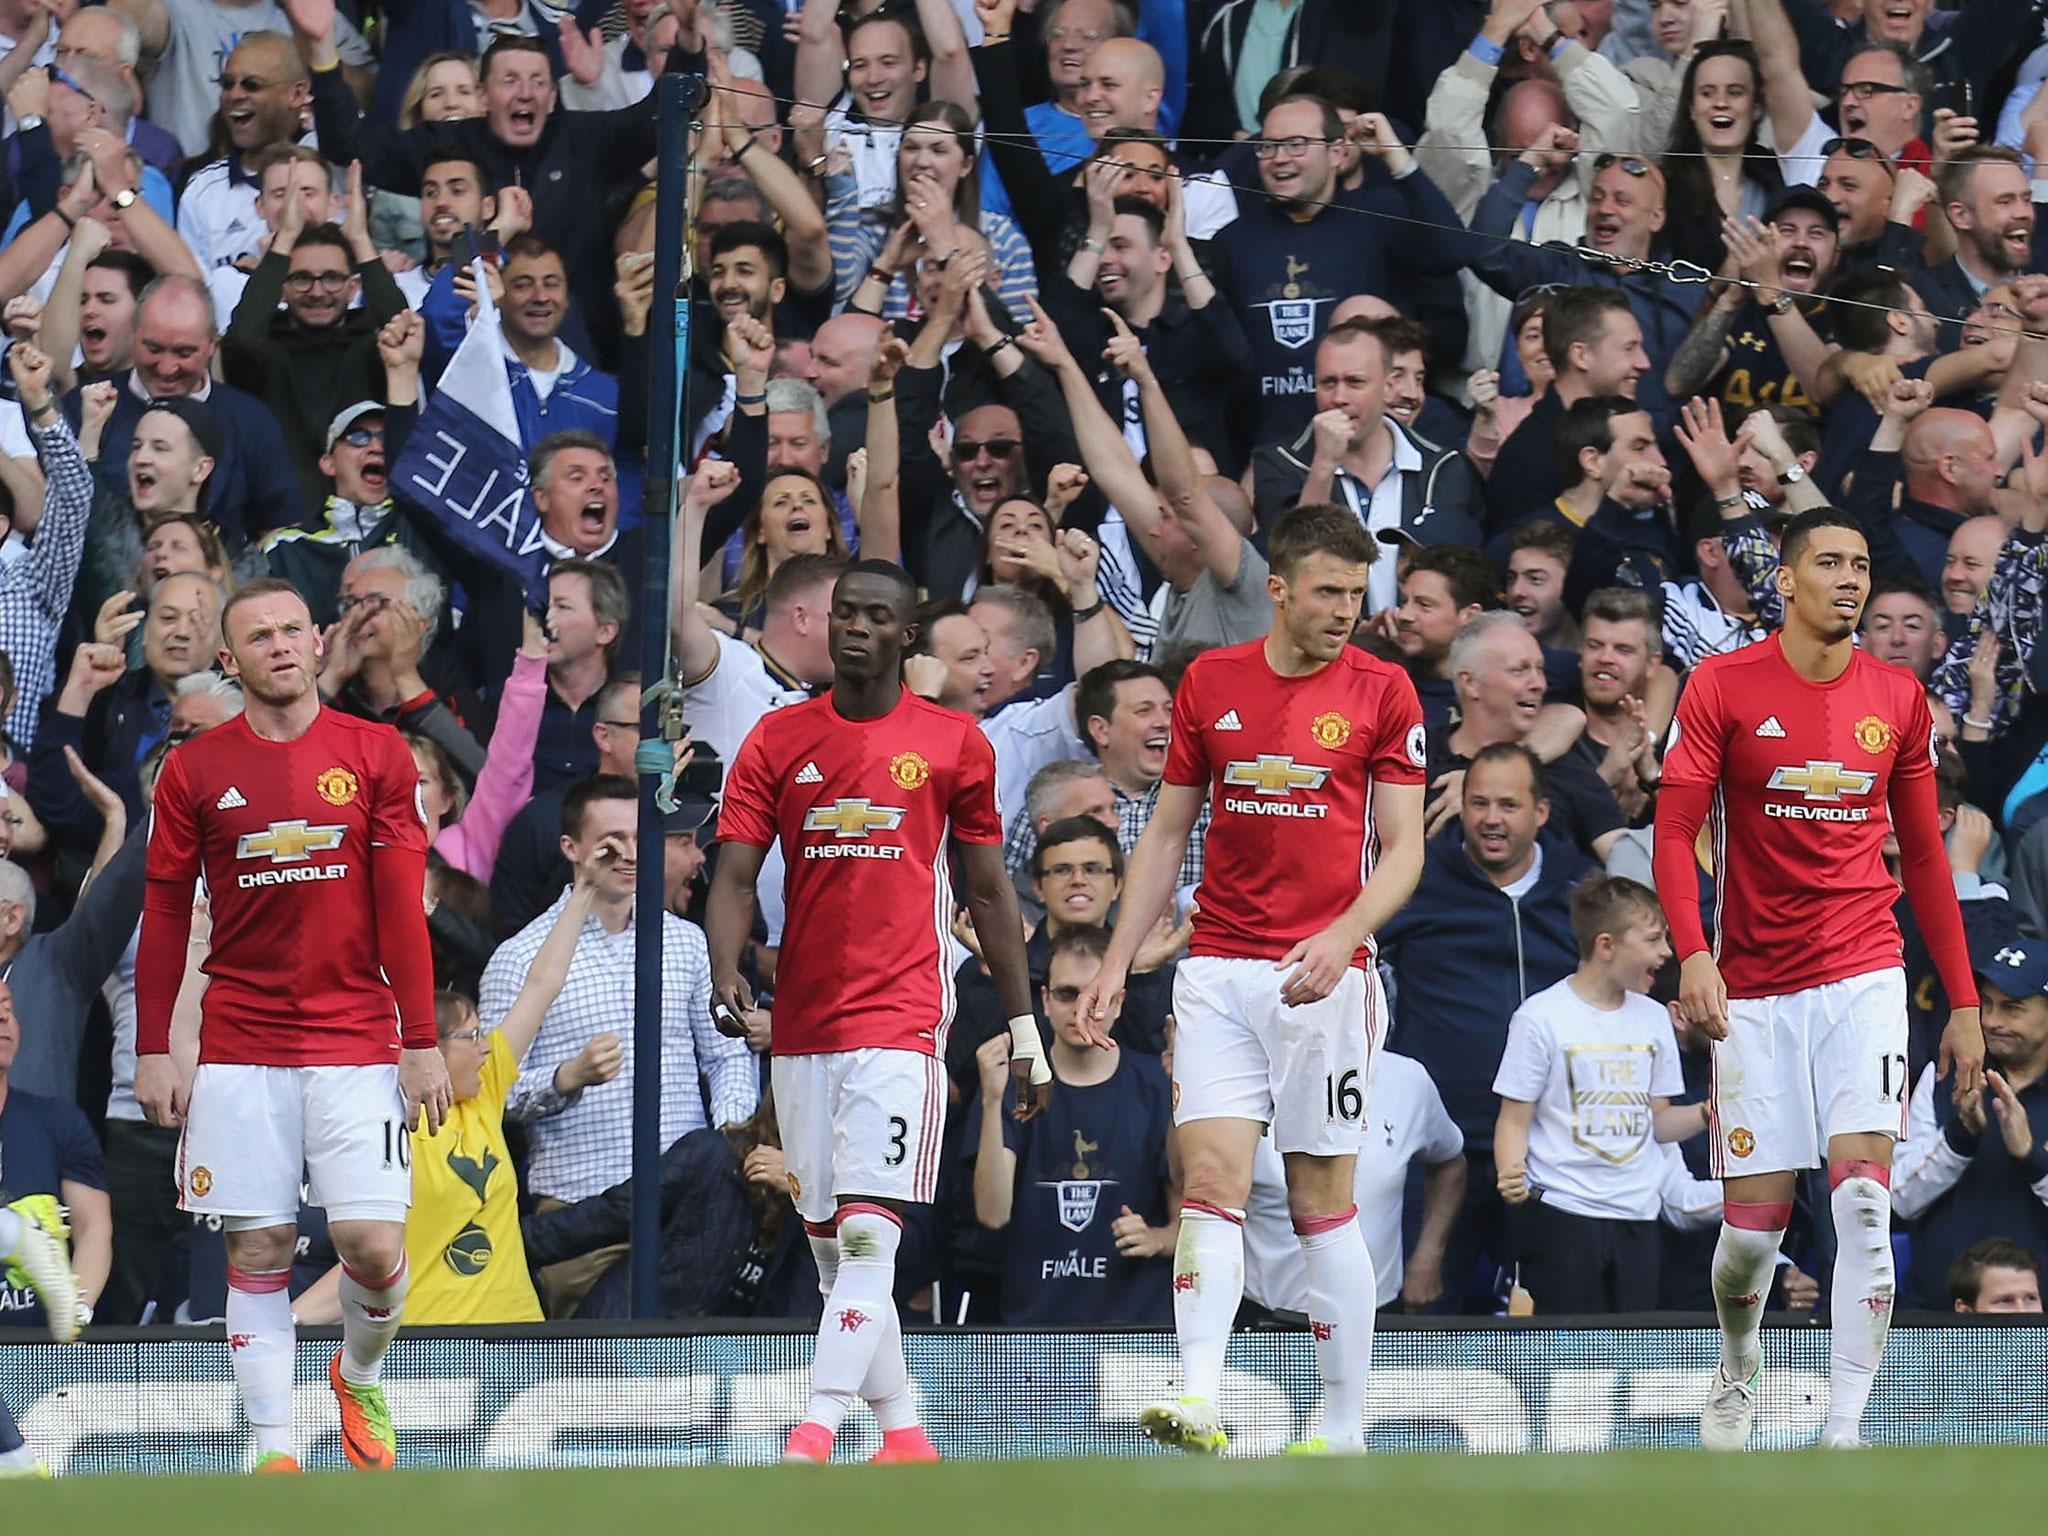 Manchester United showed just how far they've fallen in their meek defeat to Tottenham